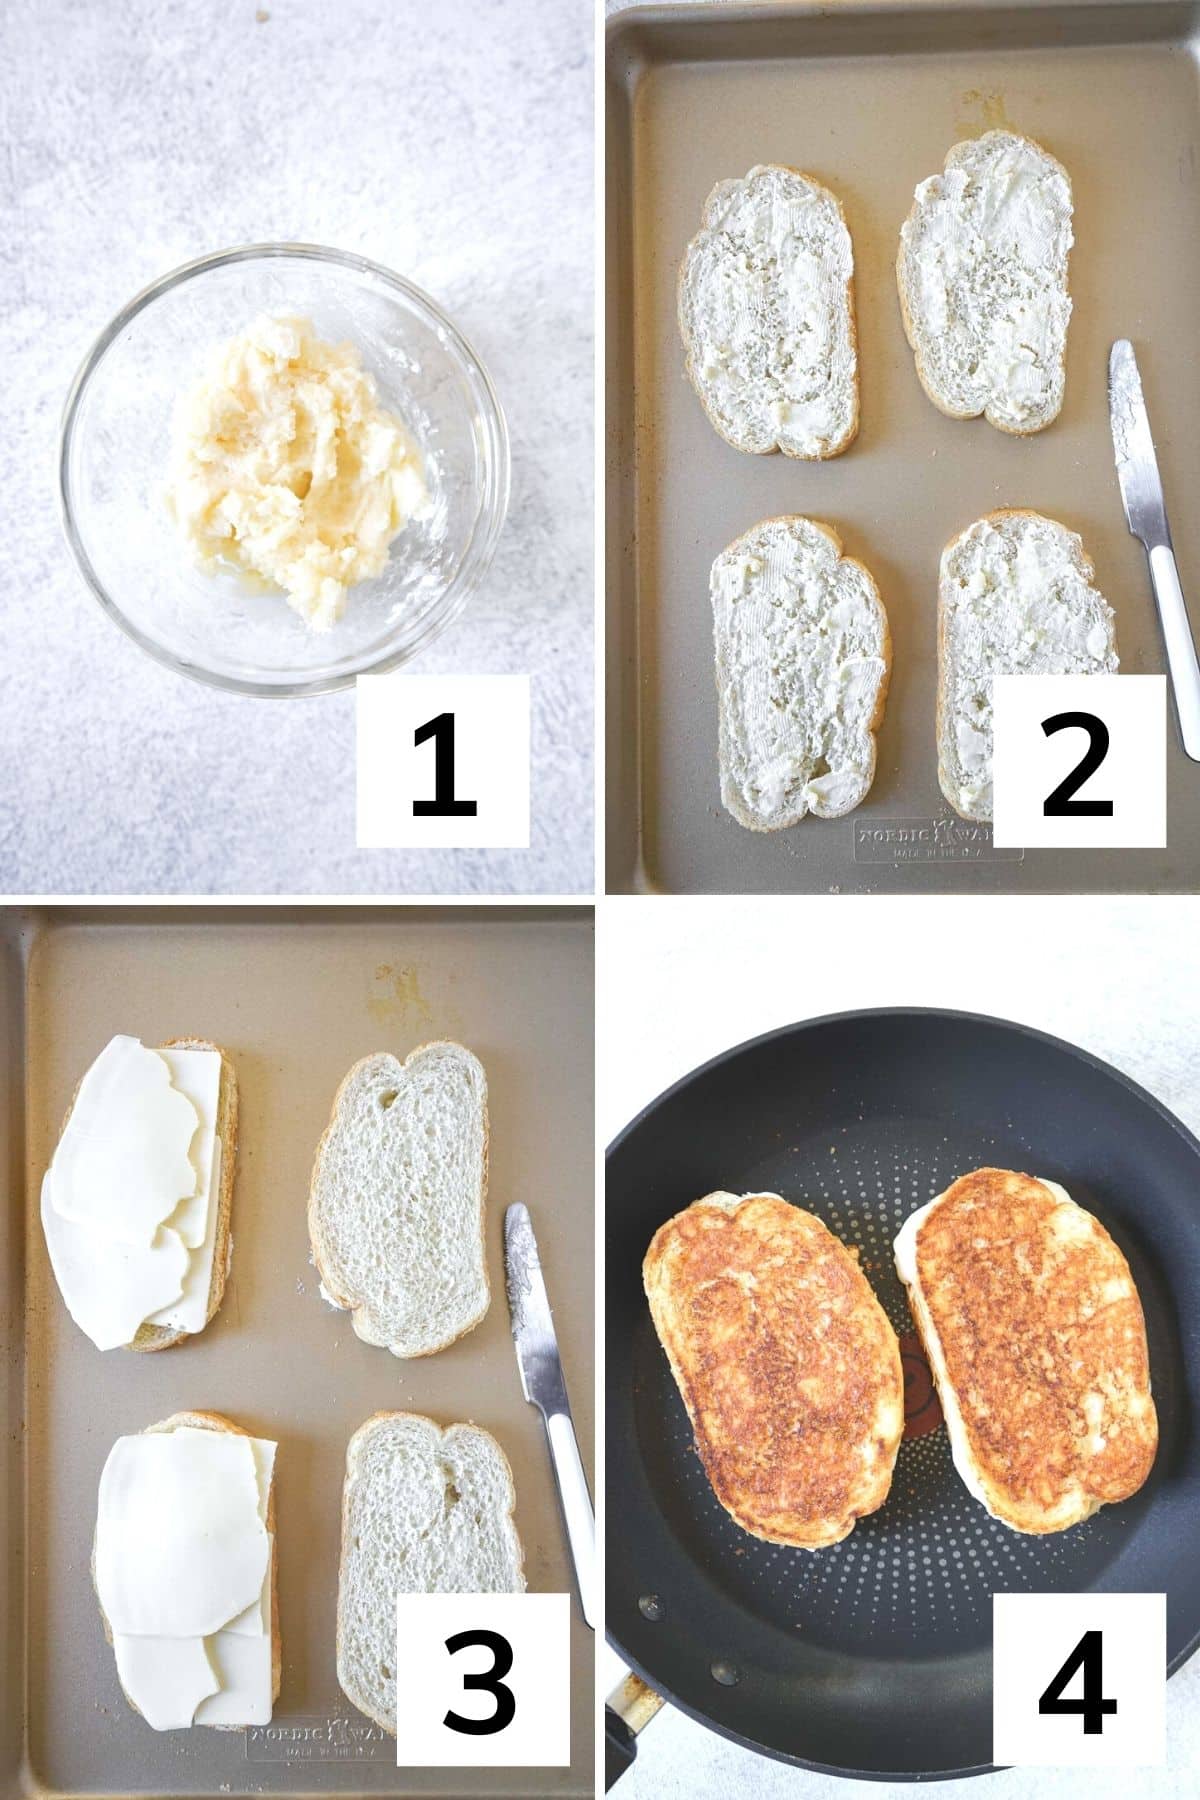 How to make a copycat Starbucks grilled cheese step by step.